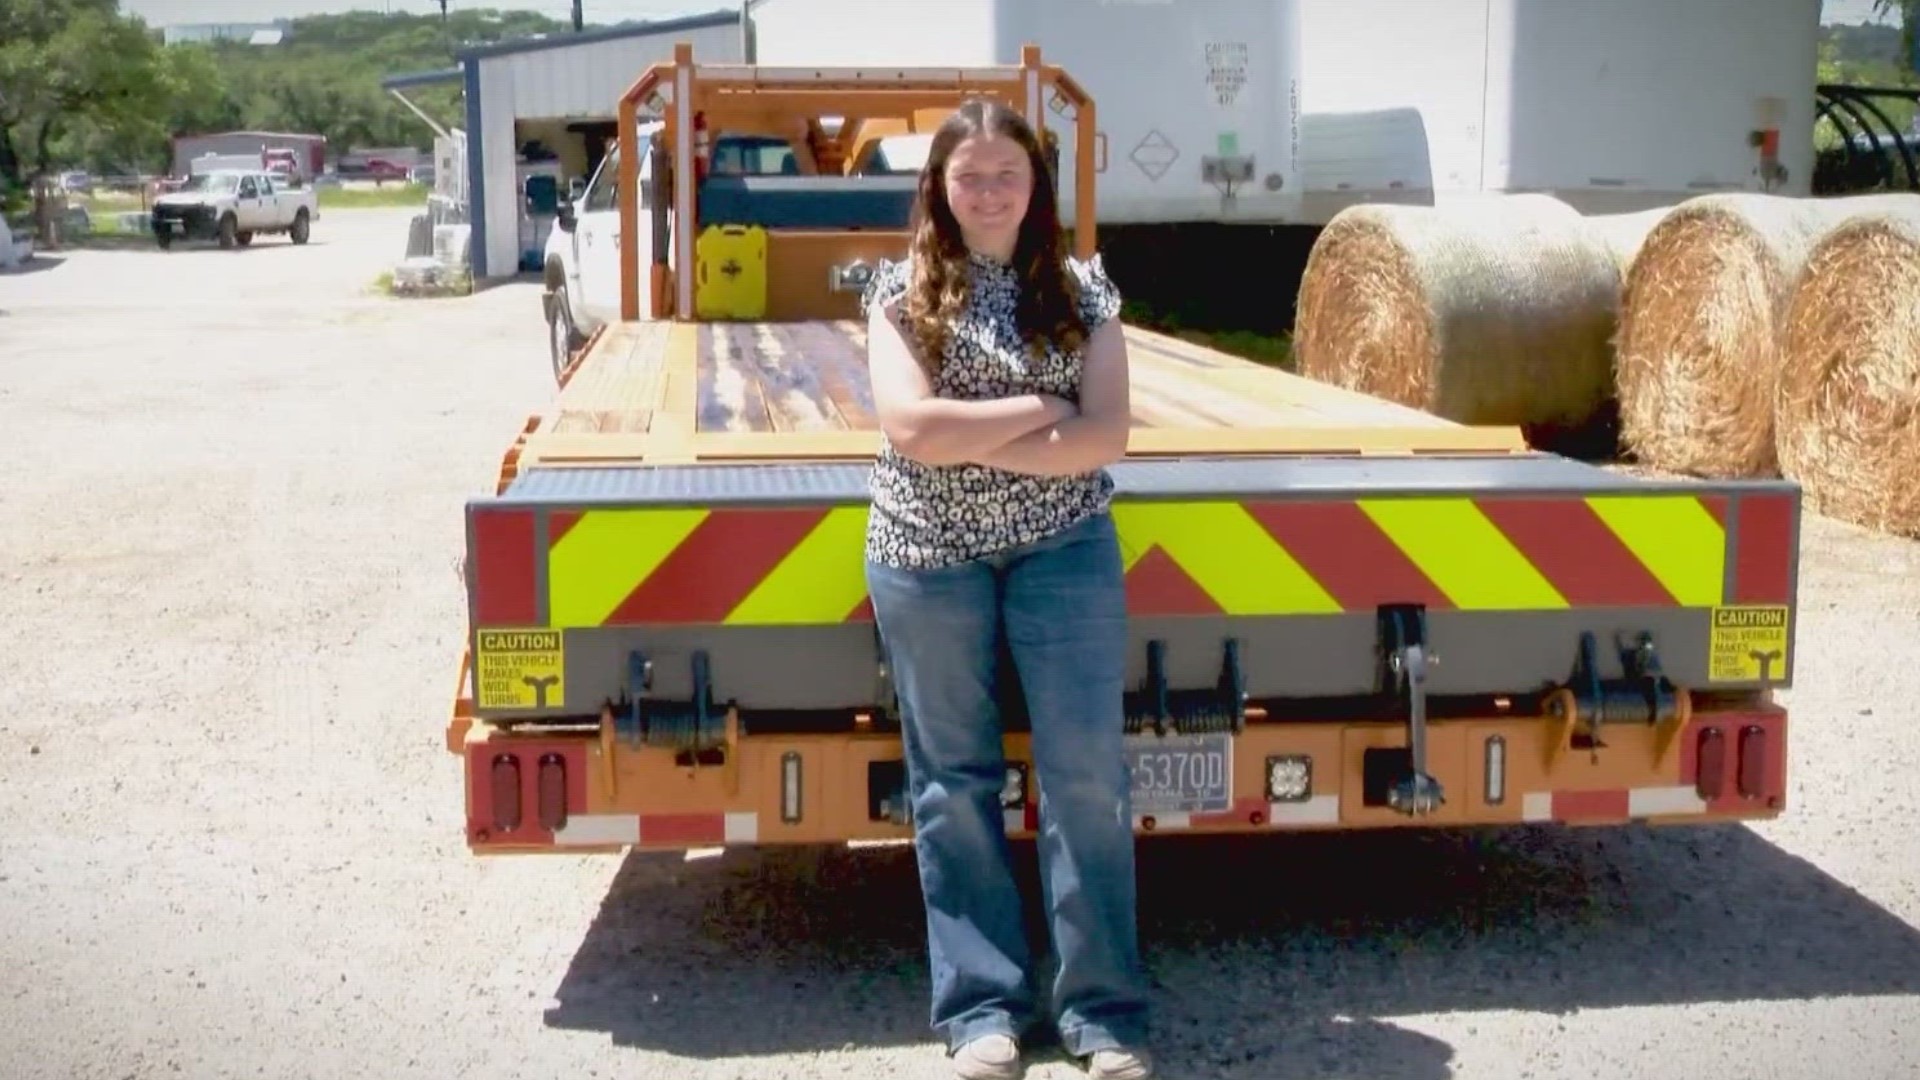 Local teen traveling across Texas in self-built trailer helping those affected by Panhandle fires